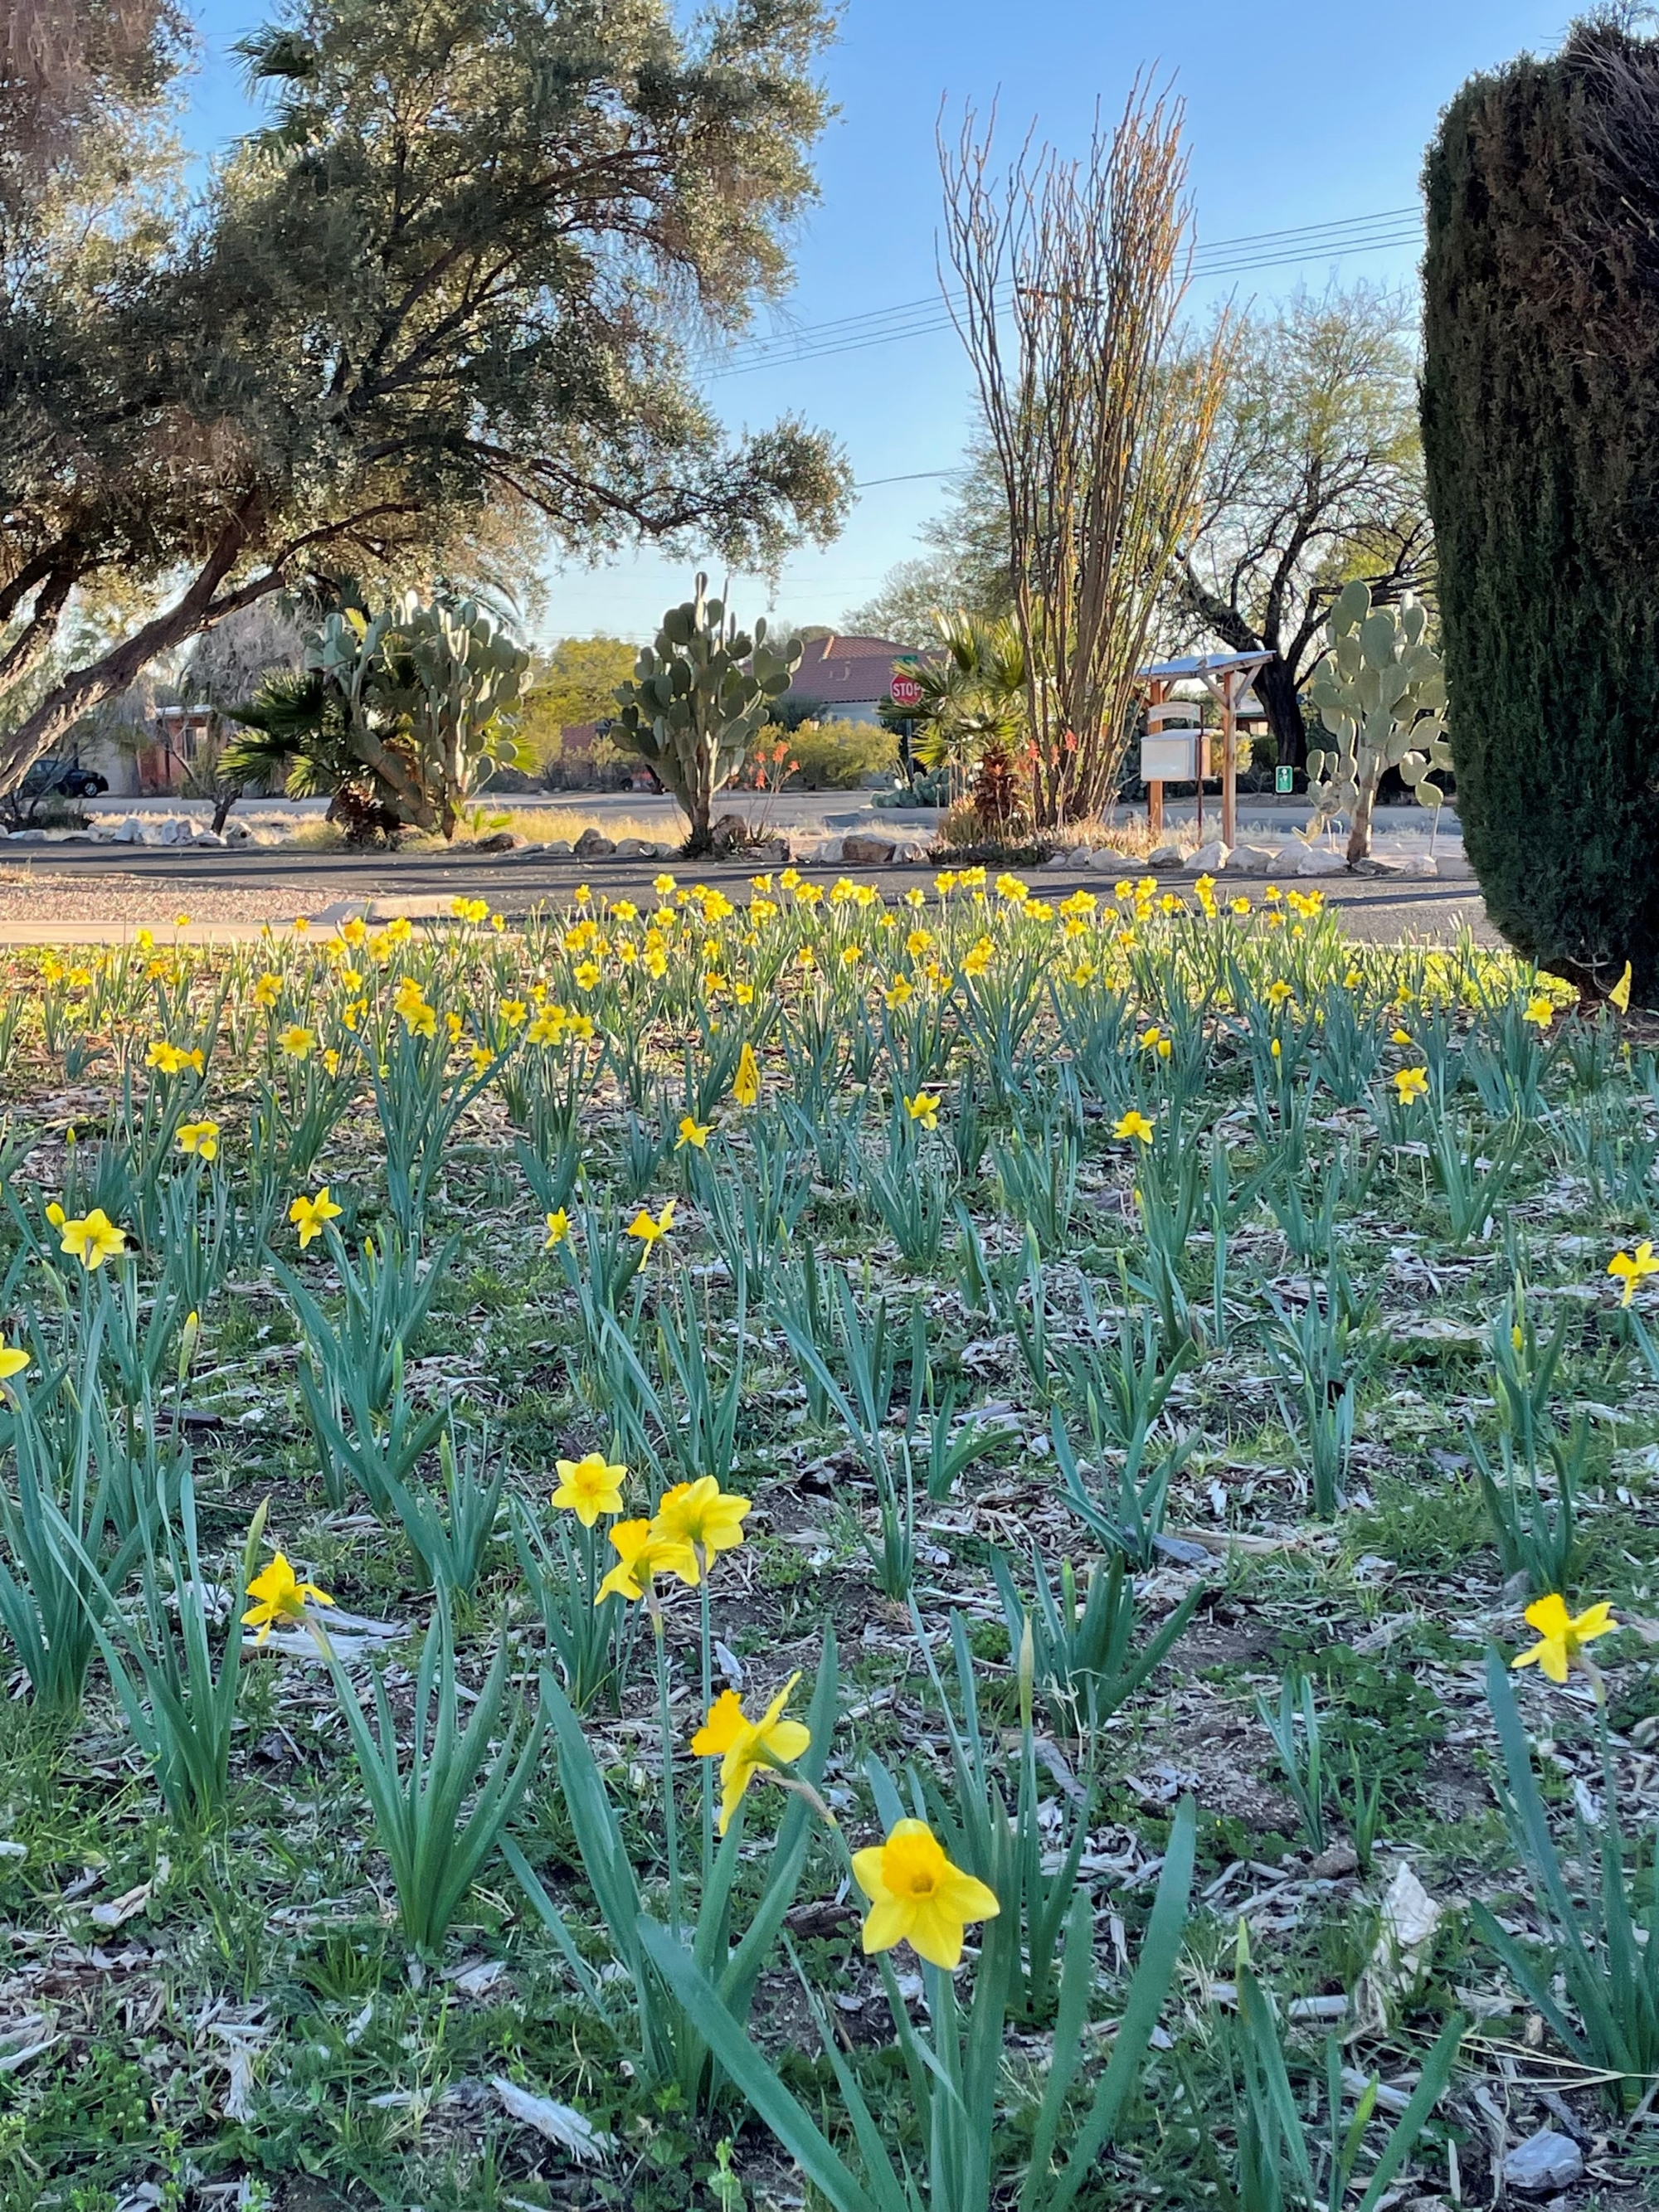 Daffodils on a meadow in Tucson.